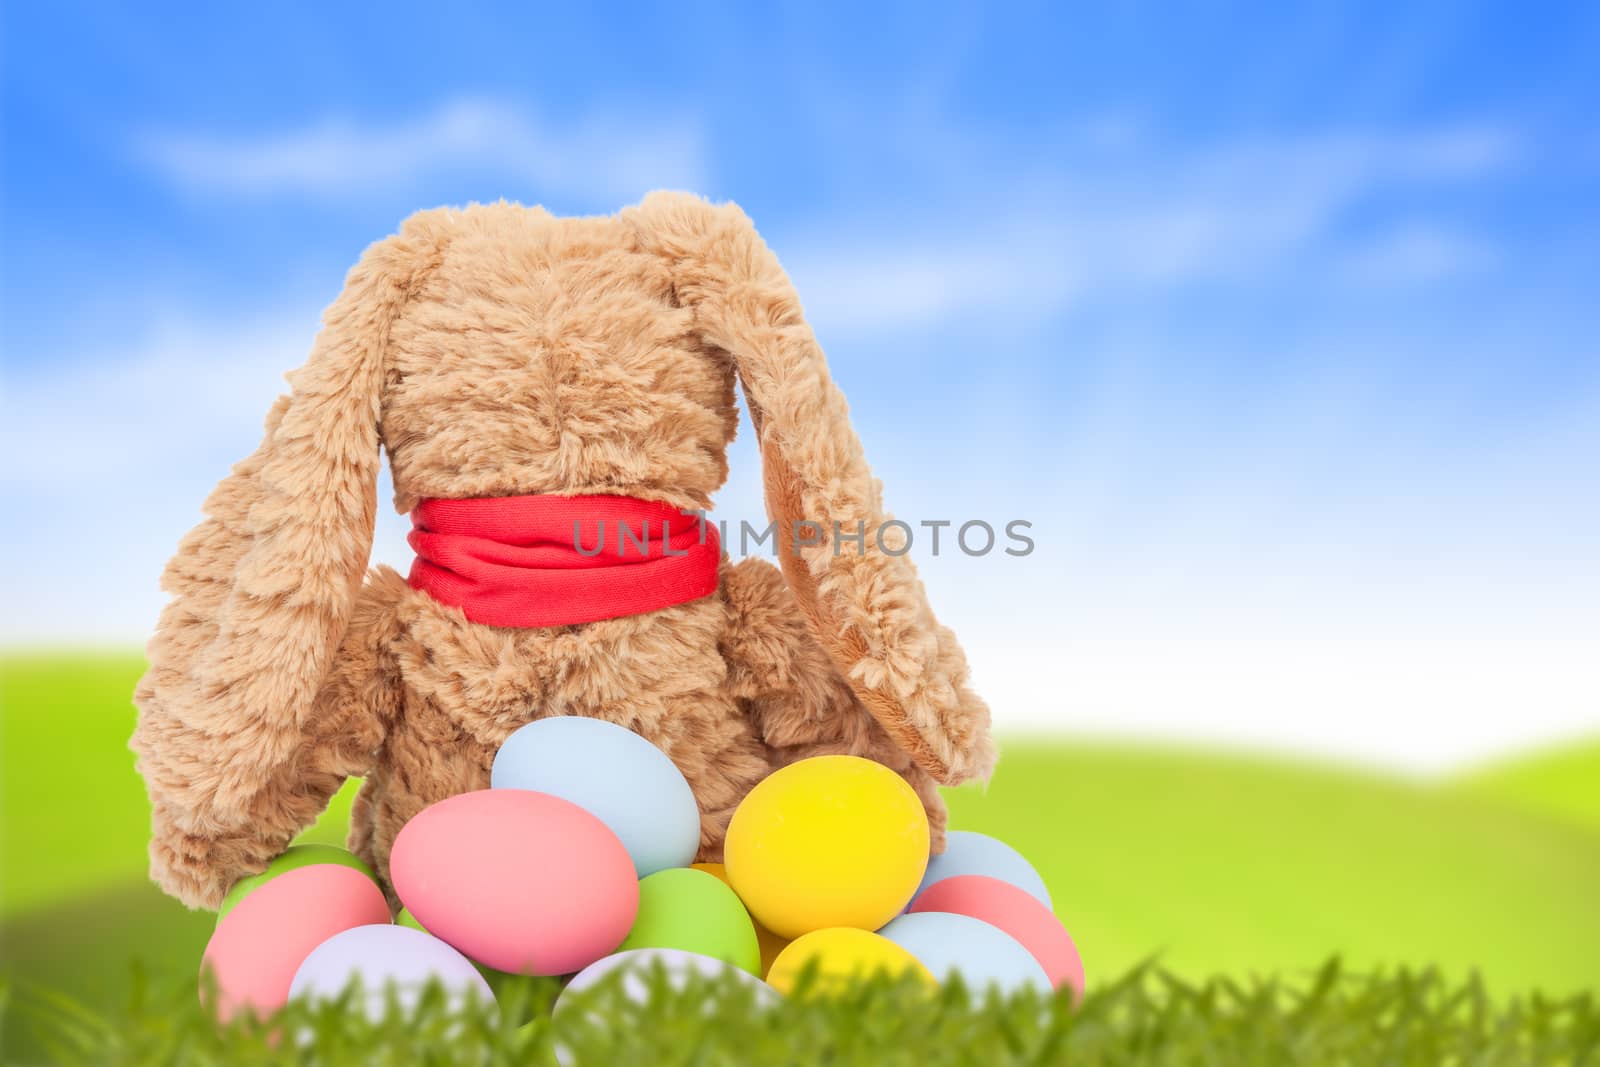 Rabbit, sit on green grass and group of colorful eggs are behind with blue sky background for happy easter festival